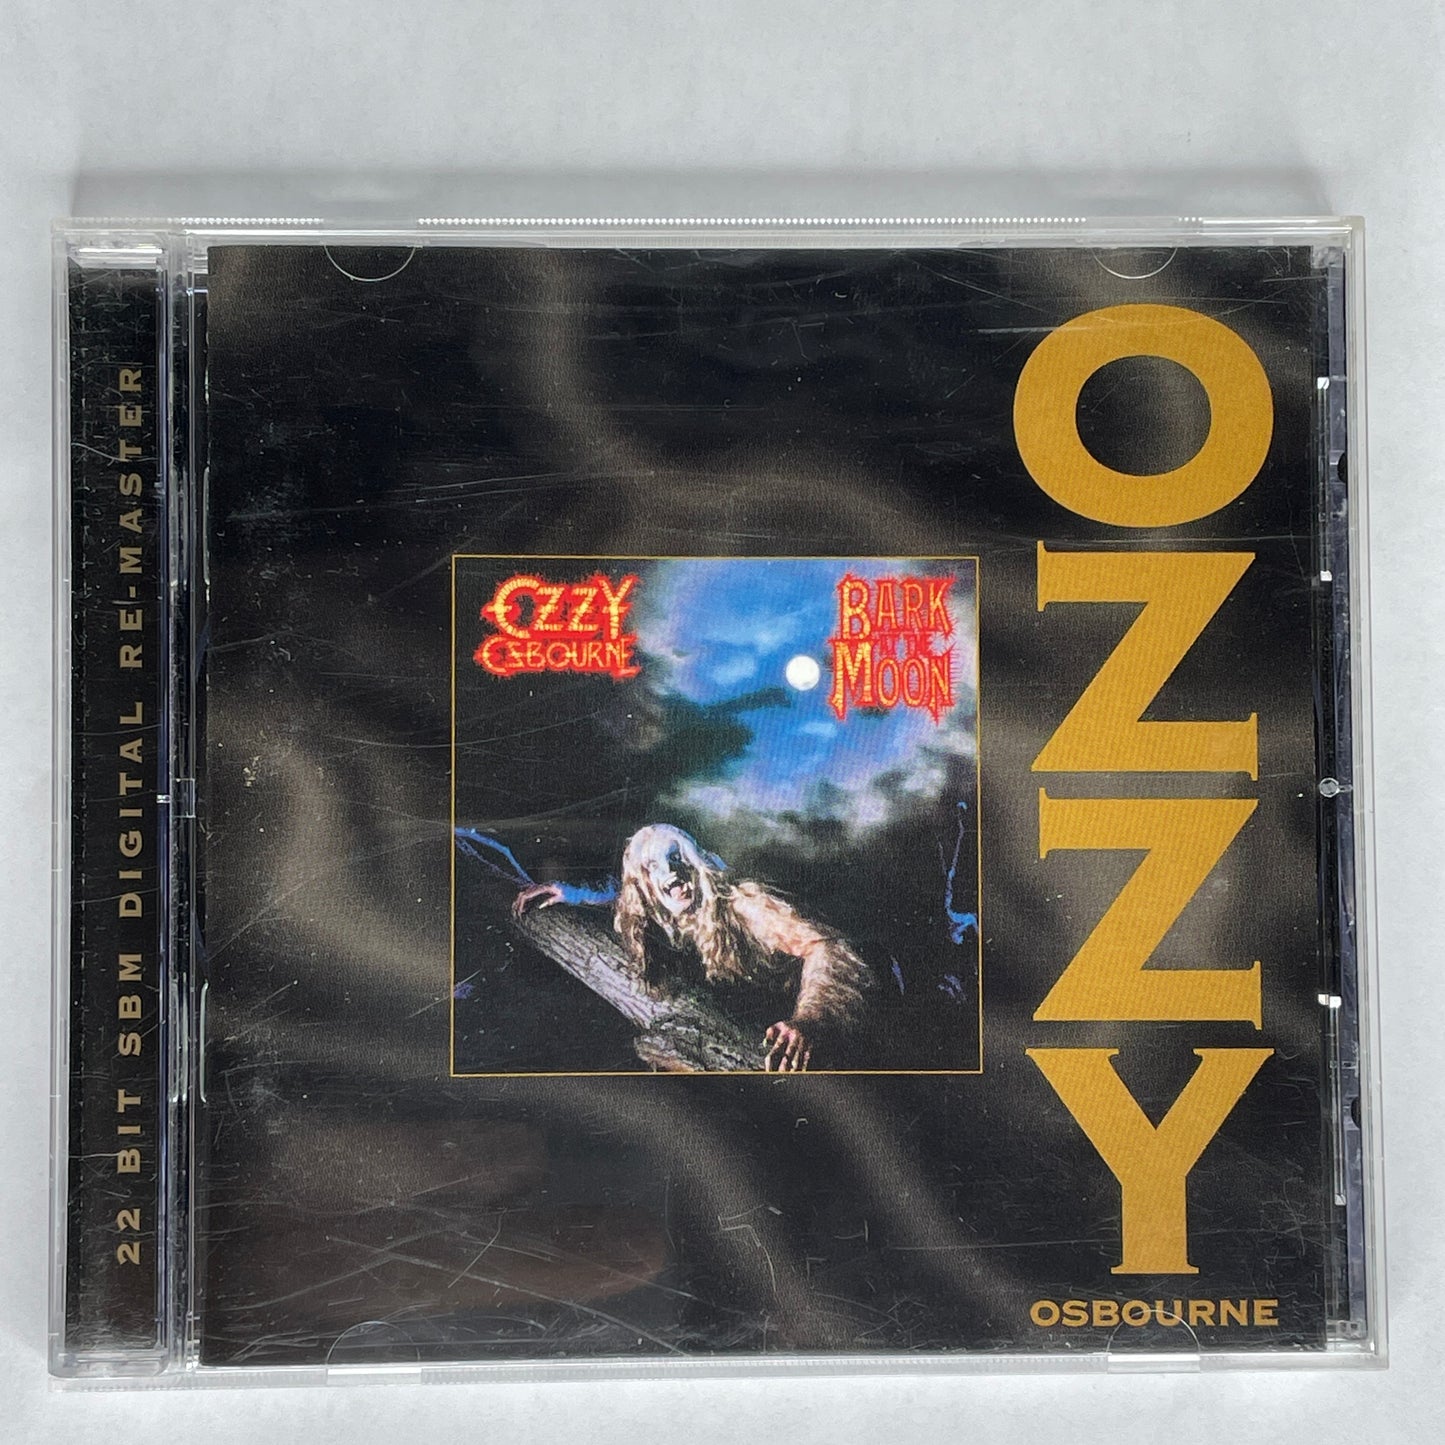 Ozzy Osbourne - Bark at the Moon 1995 re-issue CD